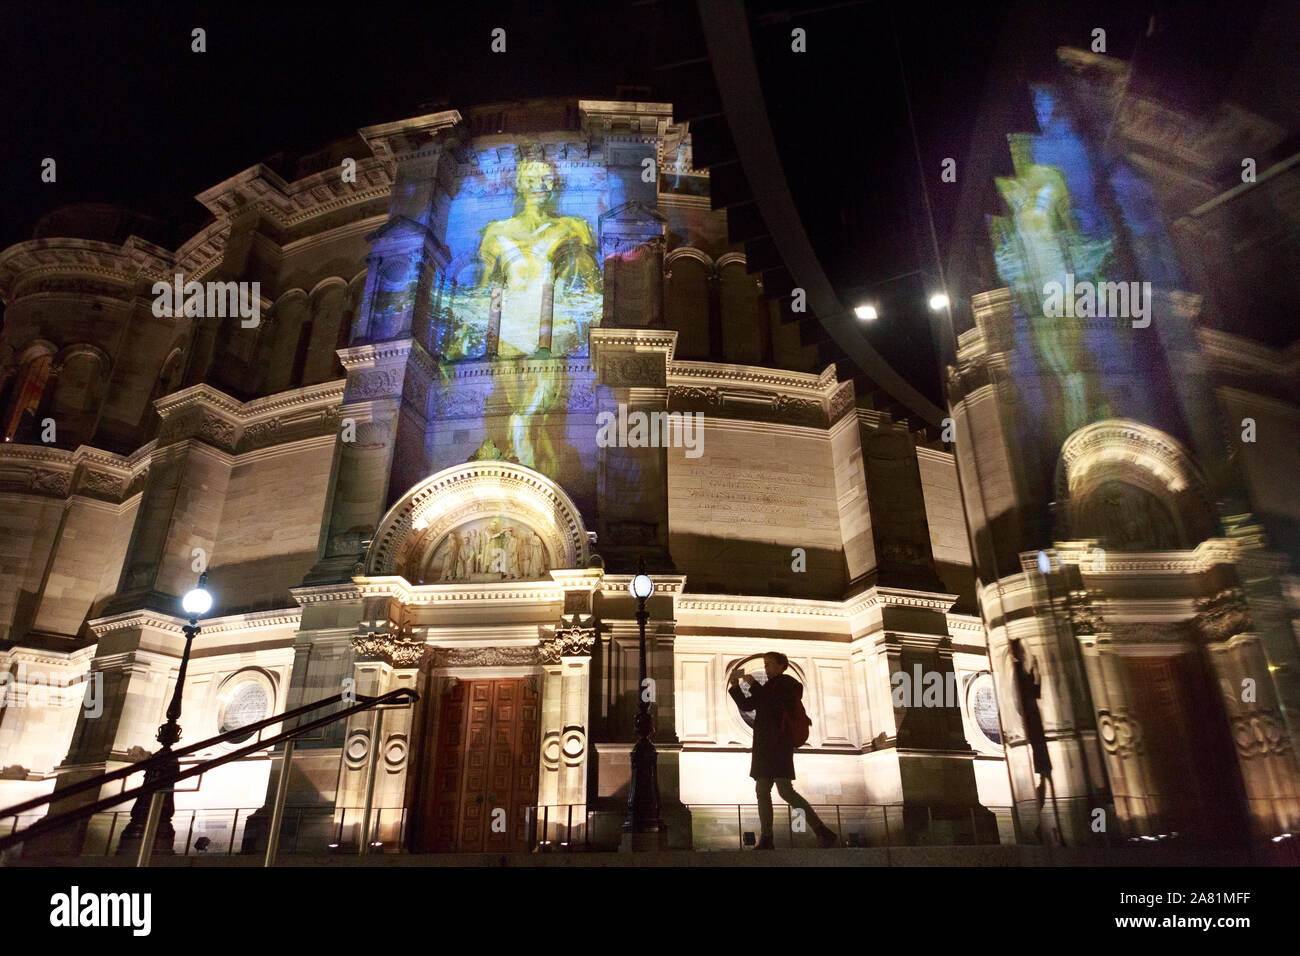 Edinburgh, Scotland. 5 November. 2019. Press call to celebrate their 2020/2021 season launch, Scottish Ballet collaborated with artist Alan McGowan to create a specially commissioned visual art projection that was unveiled in Edinburgh. Photo: Images projected onto University of Edinburgh’s McEwan Hall building. Pako Mera/Alamy Live News Stock Photo